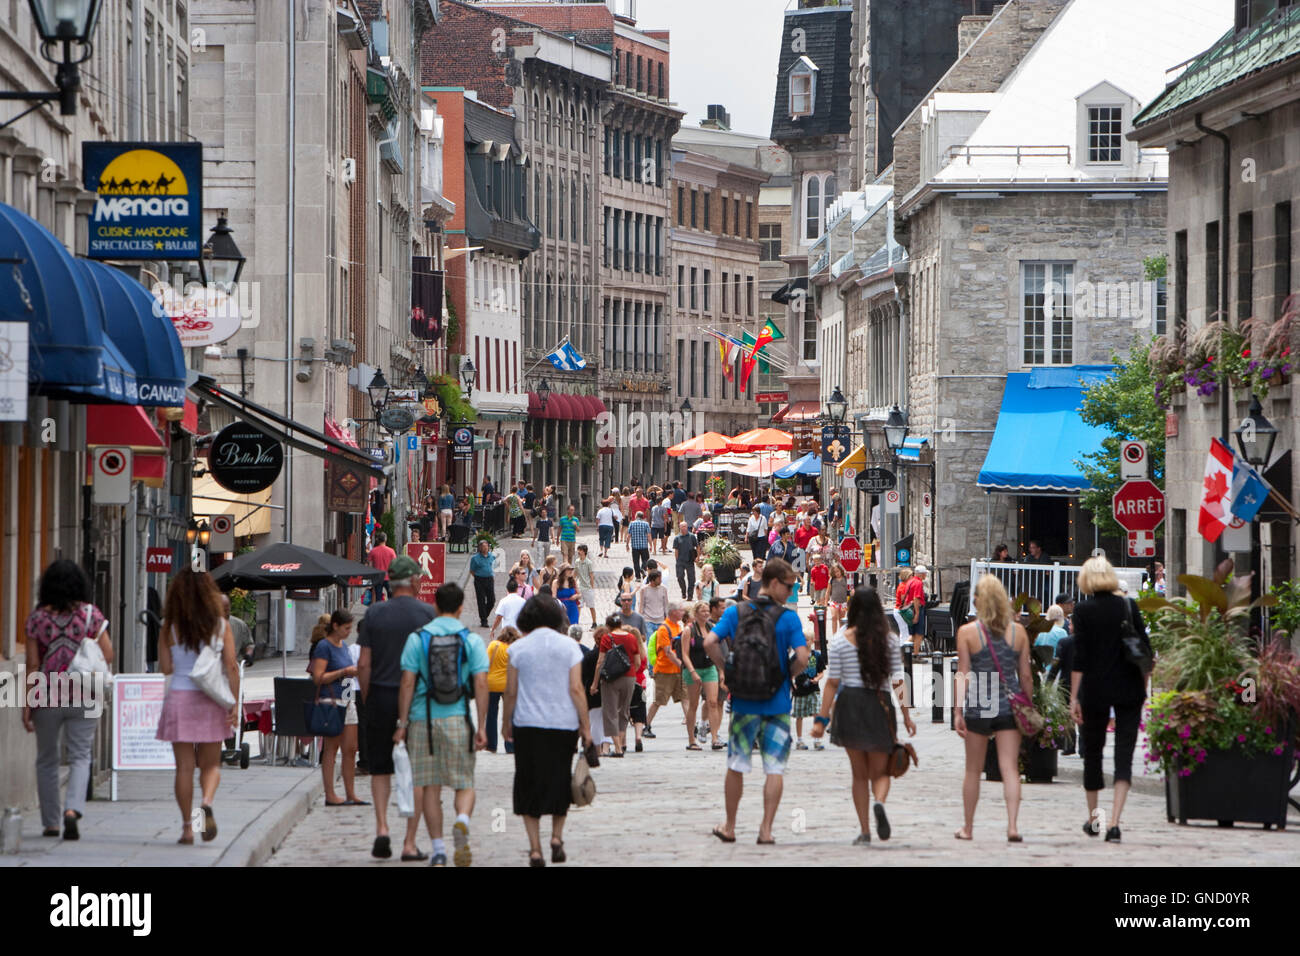 Historic District Of Old Quebec Canada High Resolution Stock Photography And Images Alamy